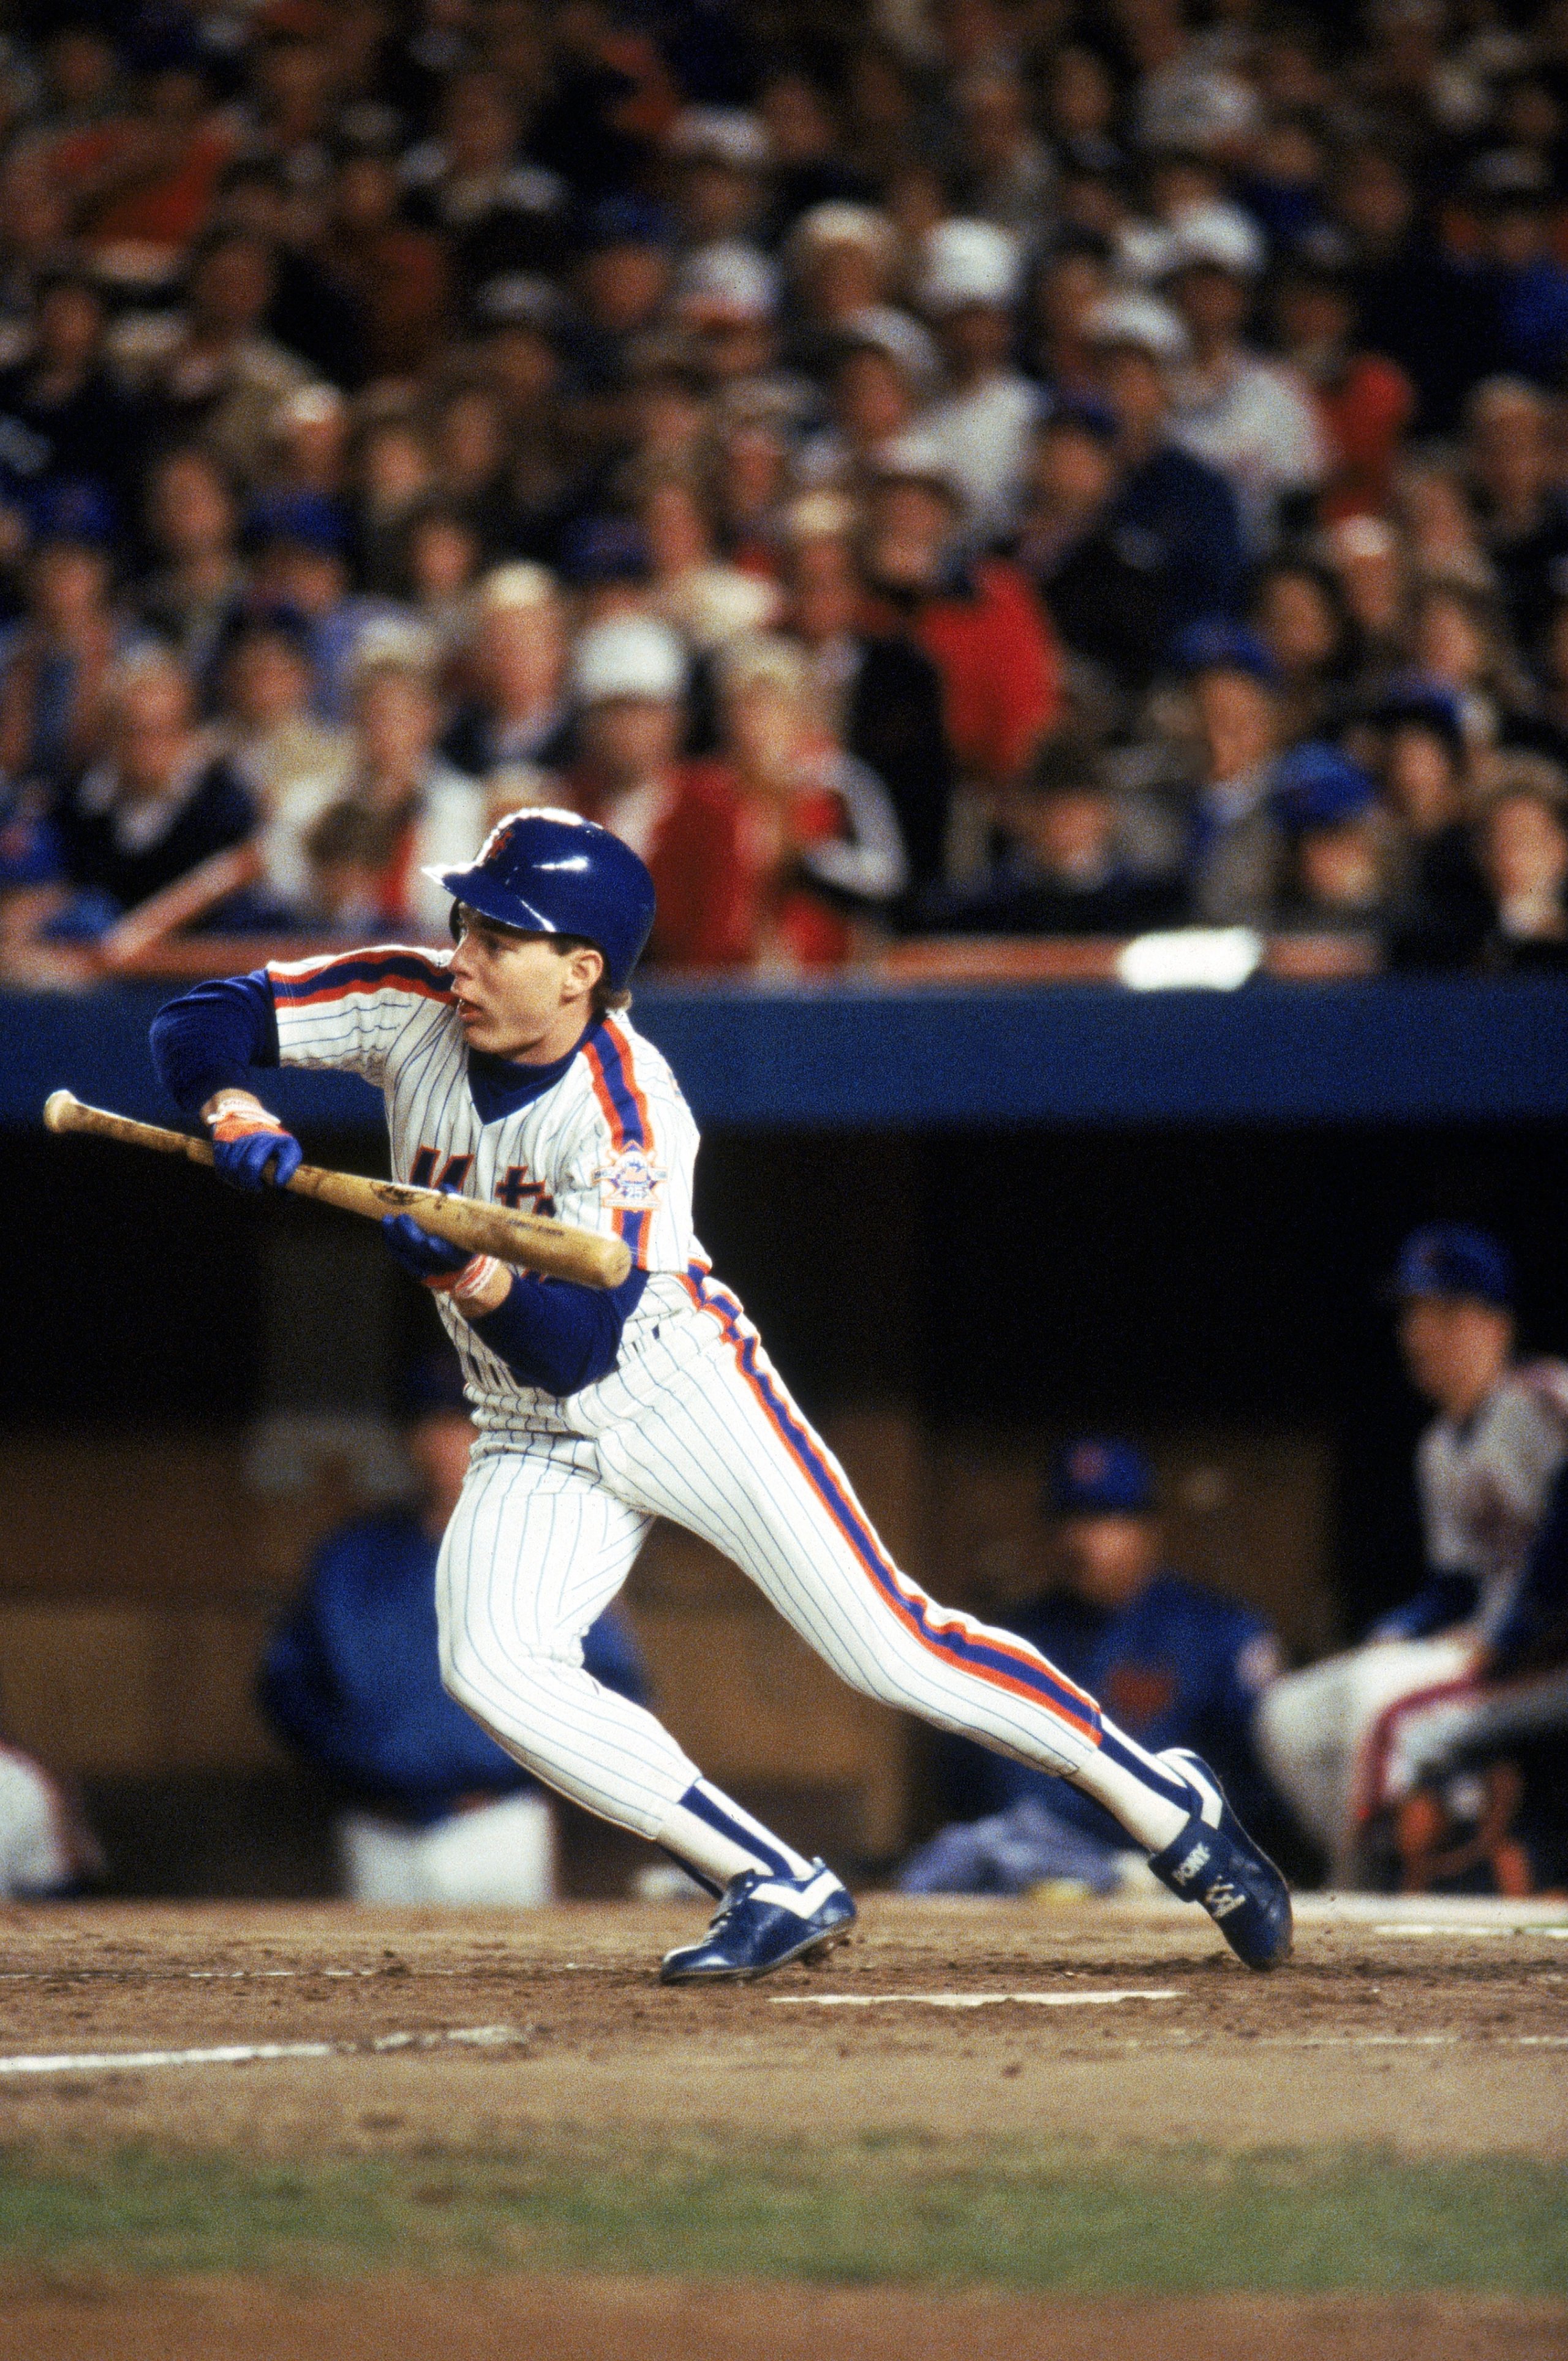 FLUSHING, NY - OCTOBER 27: Outfielder Lenny Dykstra #4 of the New York Mets bunts during game 7 of the 1986 World Series against the Boston Red Sox at Shea Stadium on October 27, 1986 in Flushing, New York. The Mets won the series 4-3. T.G. Higgins/Getty Images